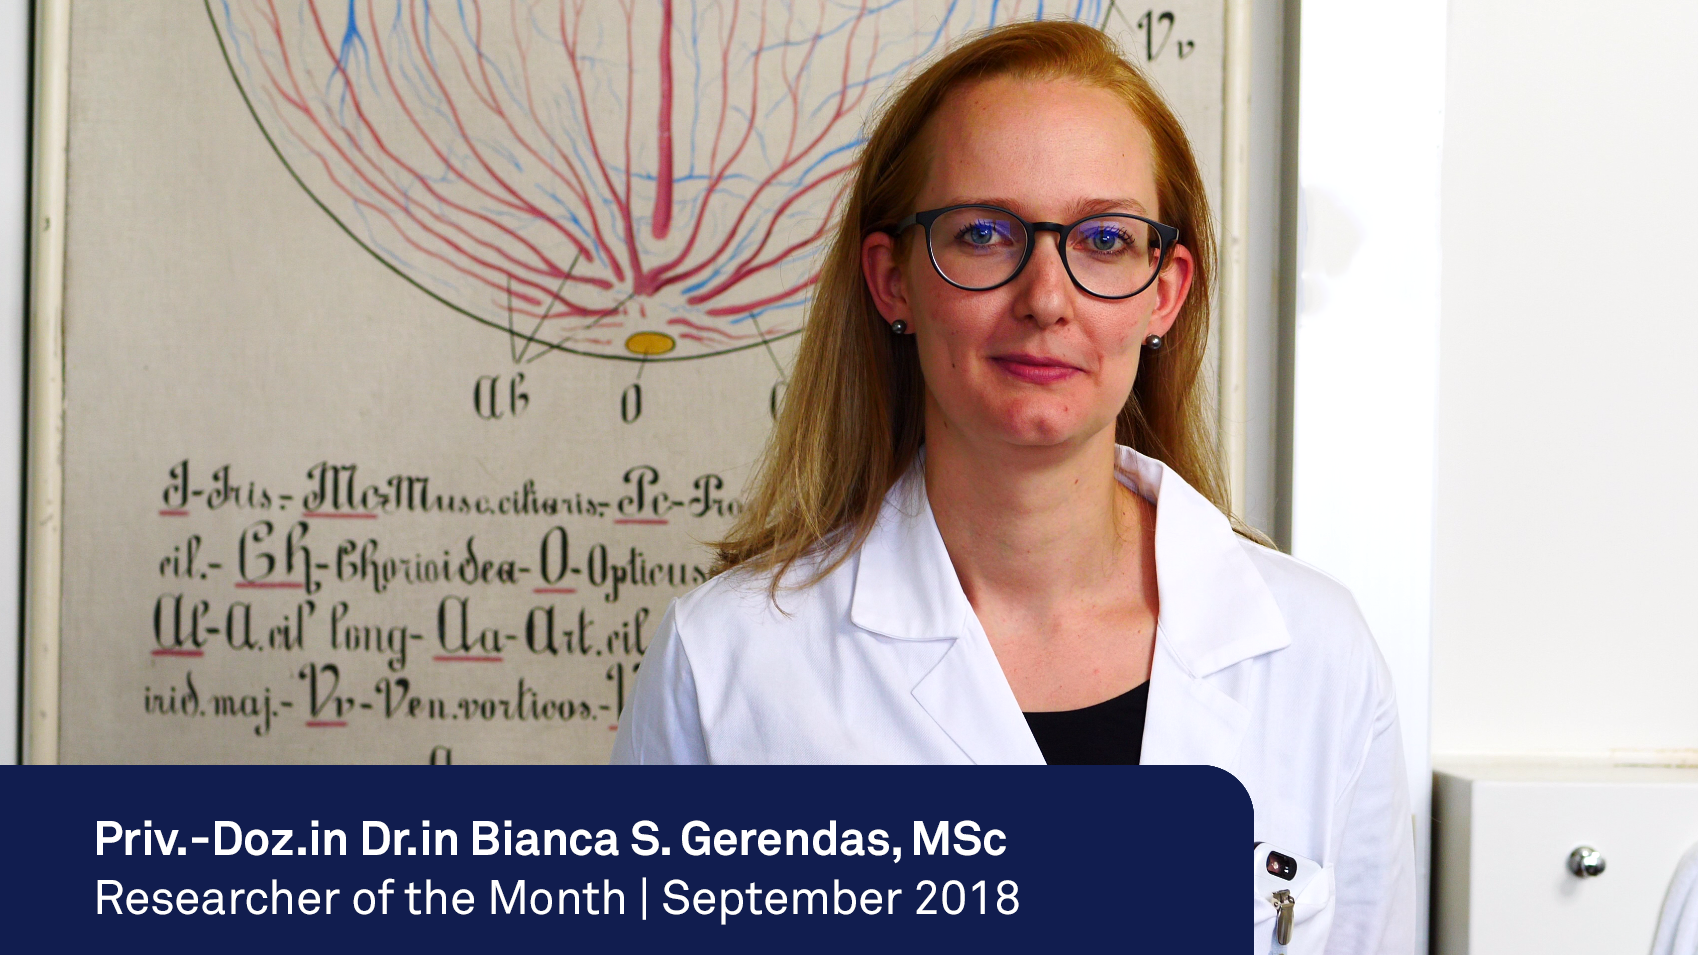 Bianca S. Gerendas | Researcher of the Month, September 2018